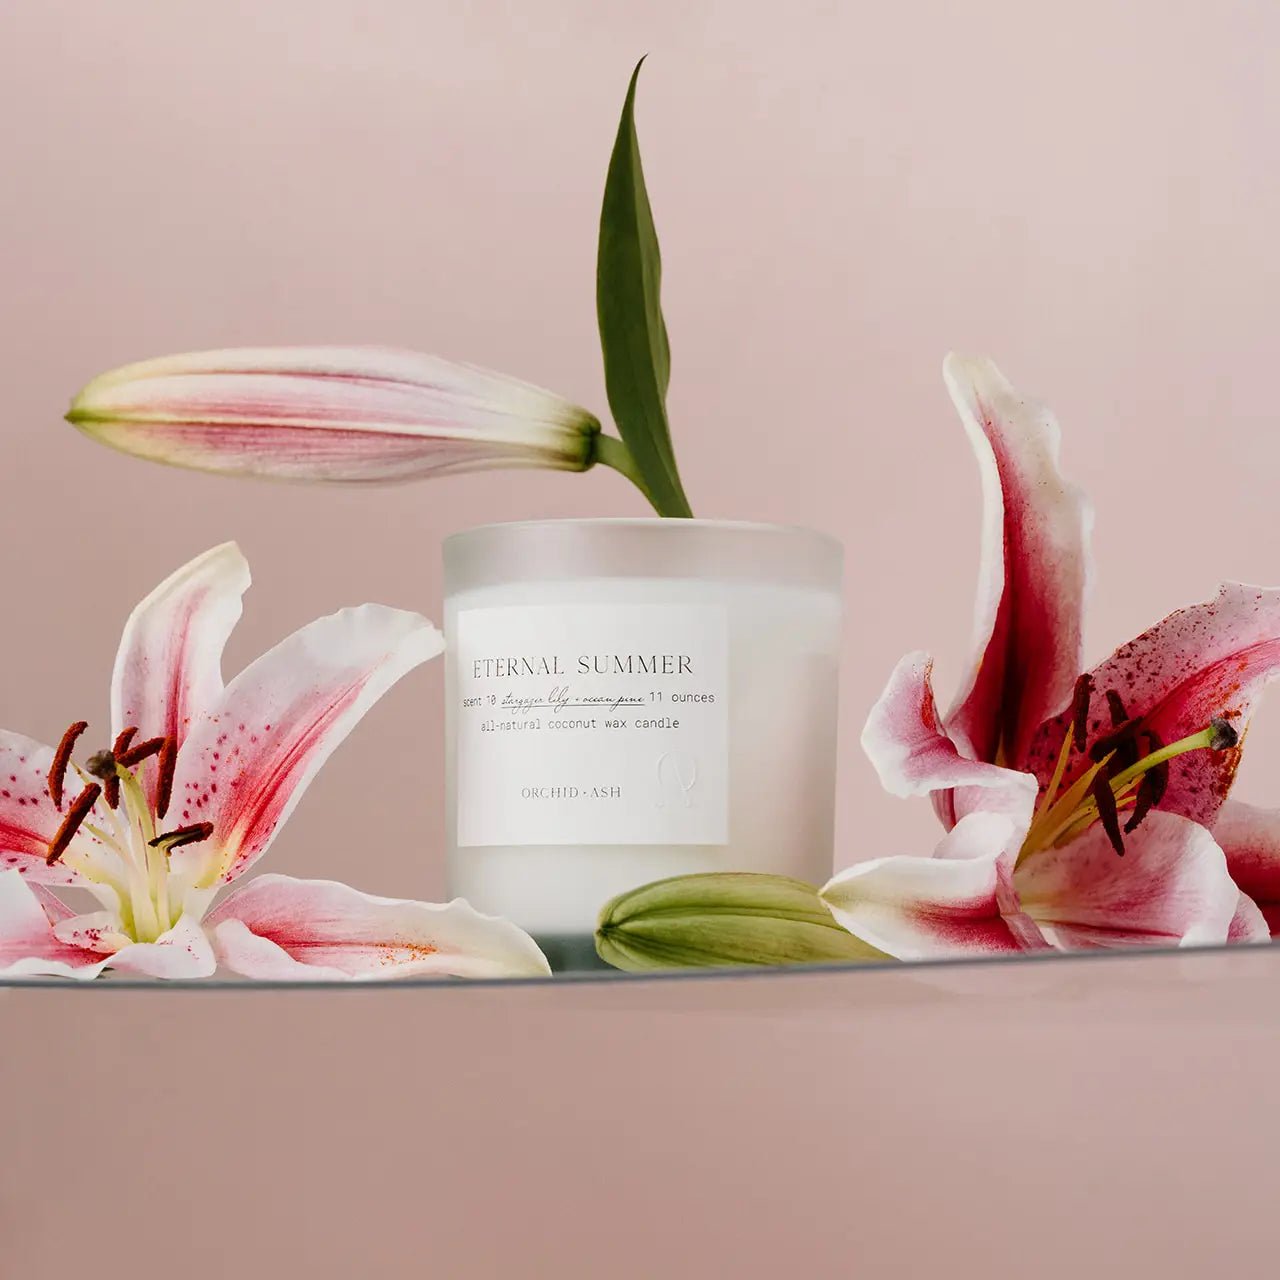 ETERNAL SUMMER | Stargazer Lily and Ocean Pine All Natural Coconut Wax Candle | 11 Ounce - Wellaine